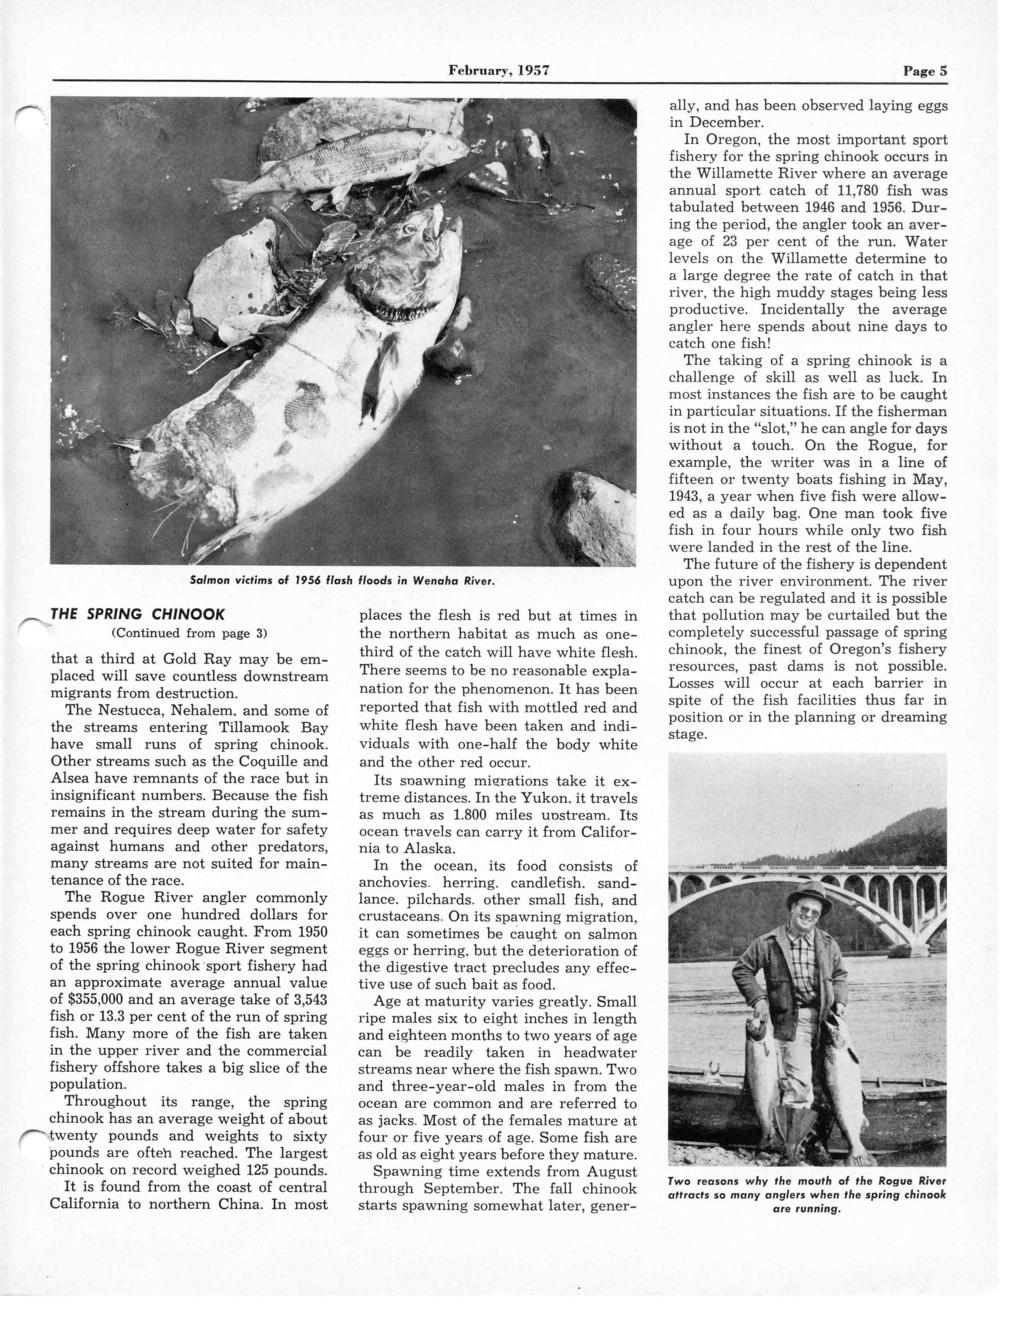 February, 1957 Page 5 THE SPRING CHINOOK (Continued from page 3) that a third at Gold Ray may be emplaced will save countless downstream migrants from destruction. The Nestucca, Nehalem.